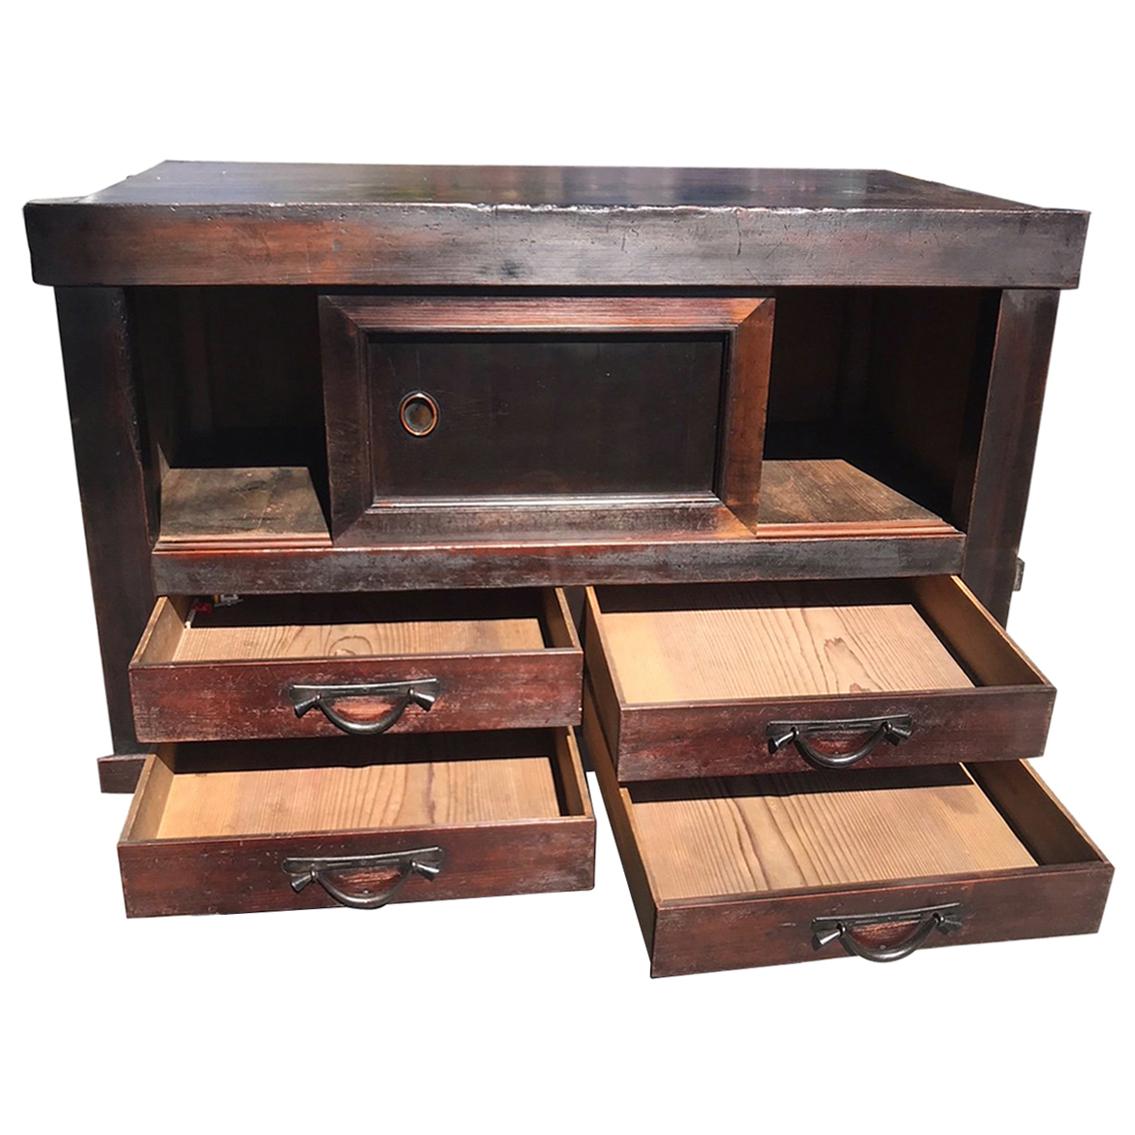 From our recent Japanese Acquisitions travels.

This is a hard to find antique smaller tansu storage chest/cabinet hand crafted with beautifully selected grained wood and fine lines and a multitude of storage features and options. It is in